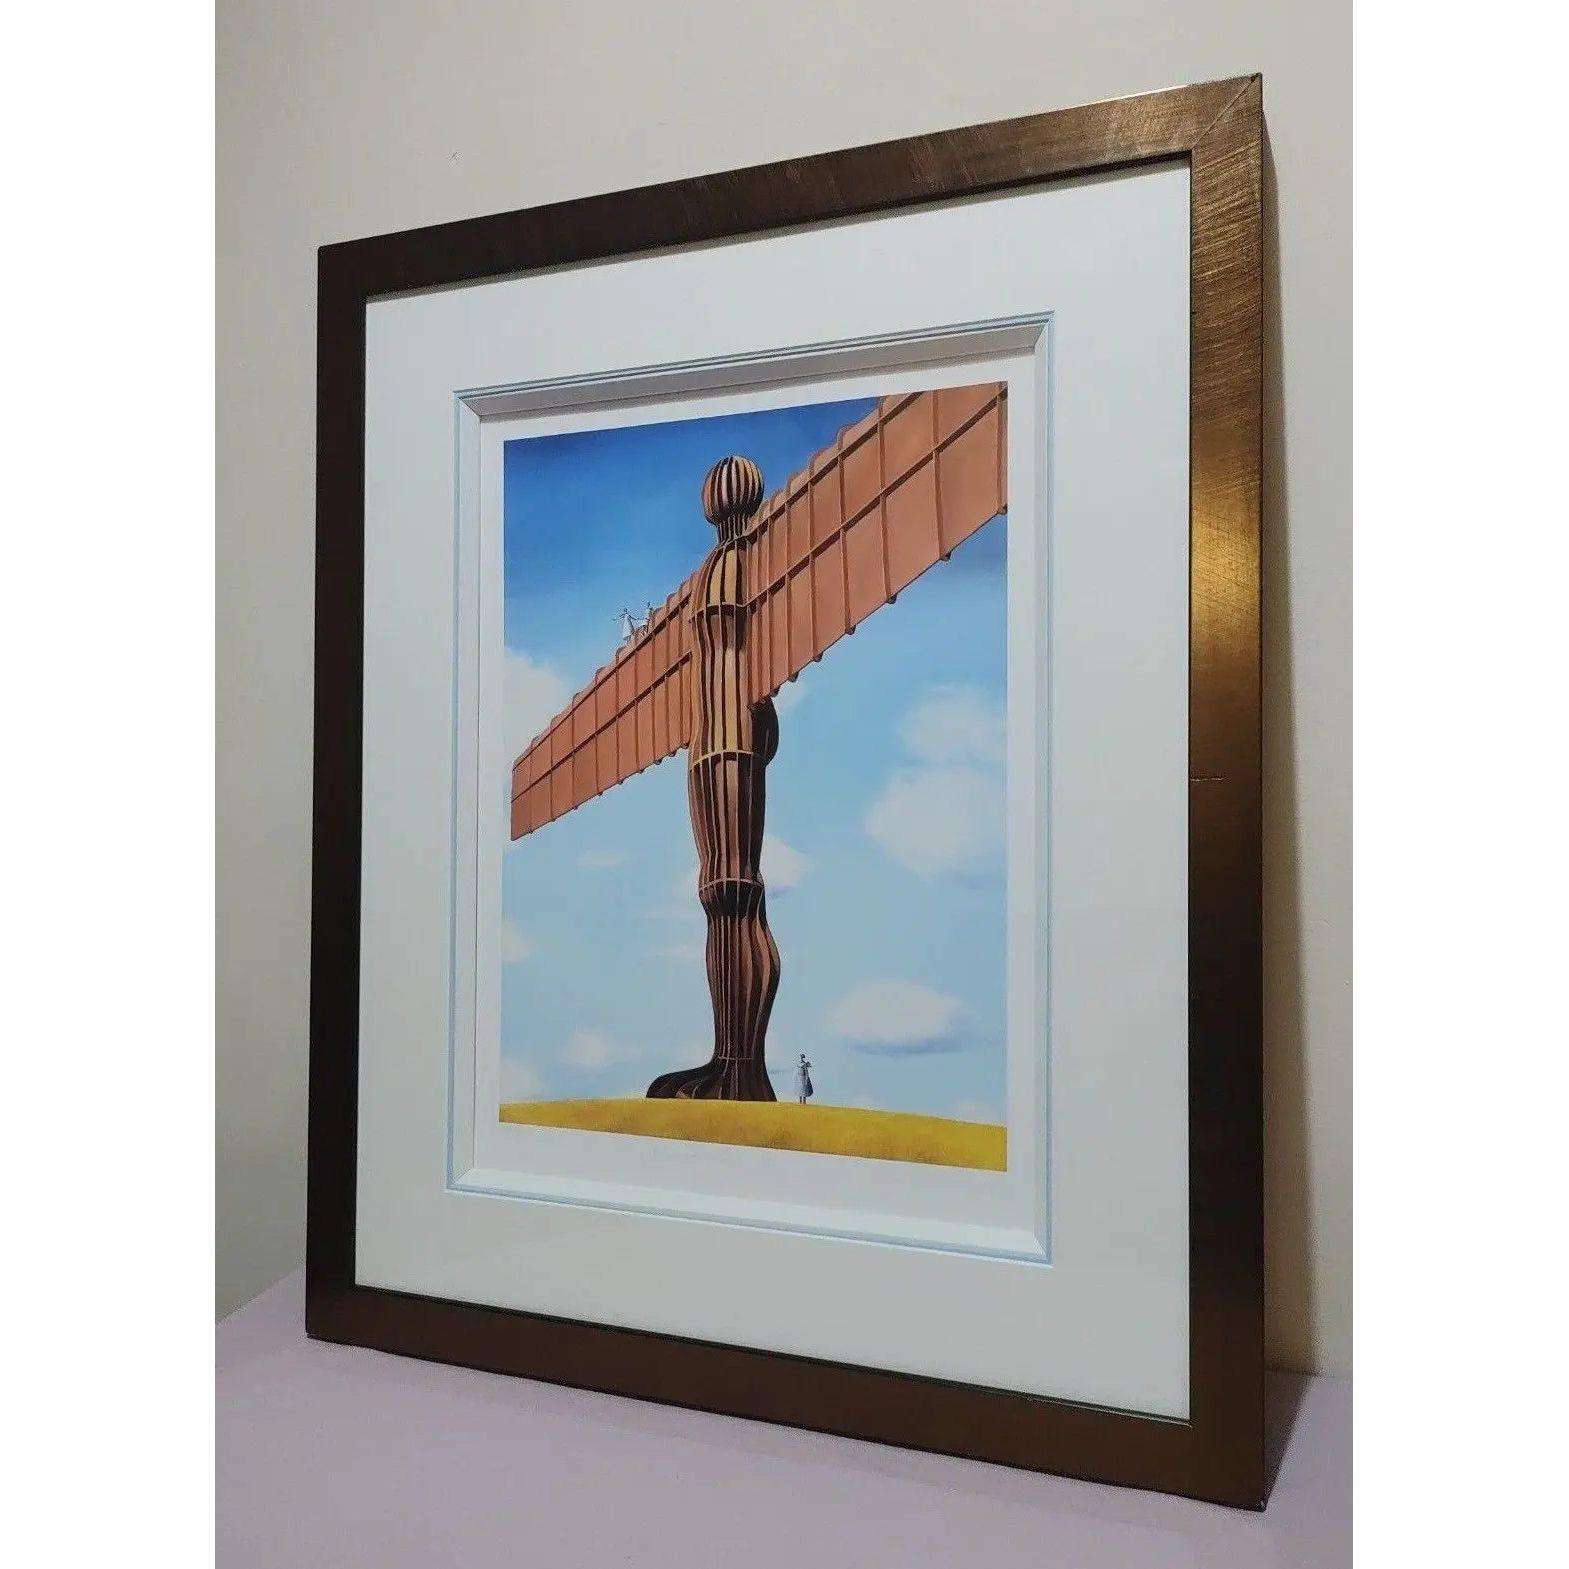 Sarah Jane Szikora - Angel of the North - Limited Edition Giclee Print 73/195 - Tommy's Treasure